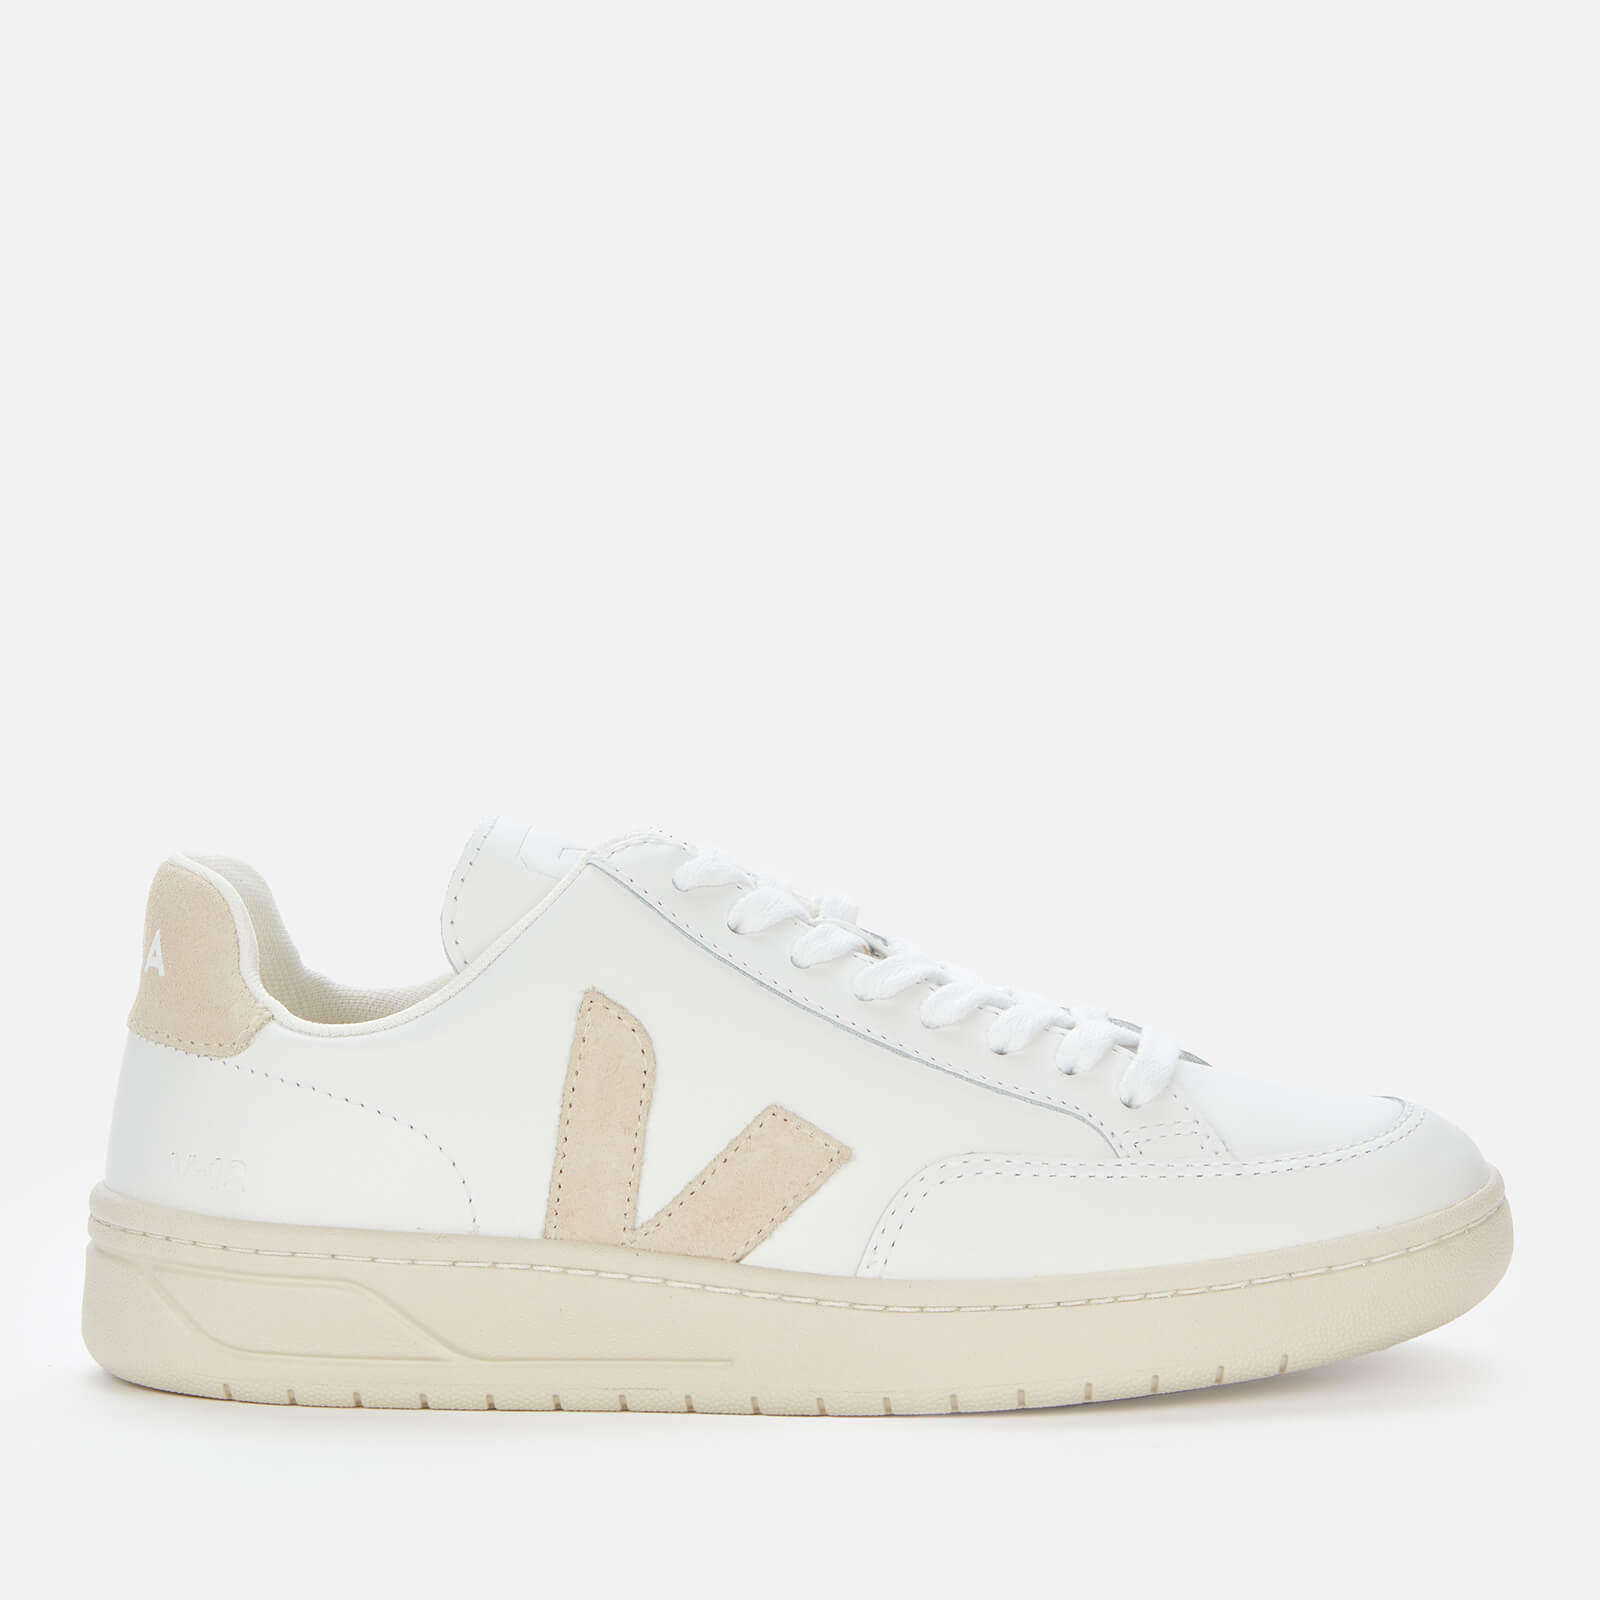 Veja Women's V-12 Leather Trainers - Extra White/Sable - UK 7